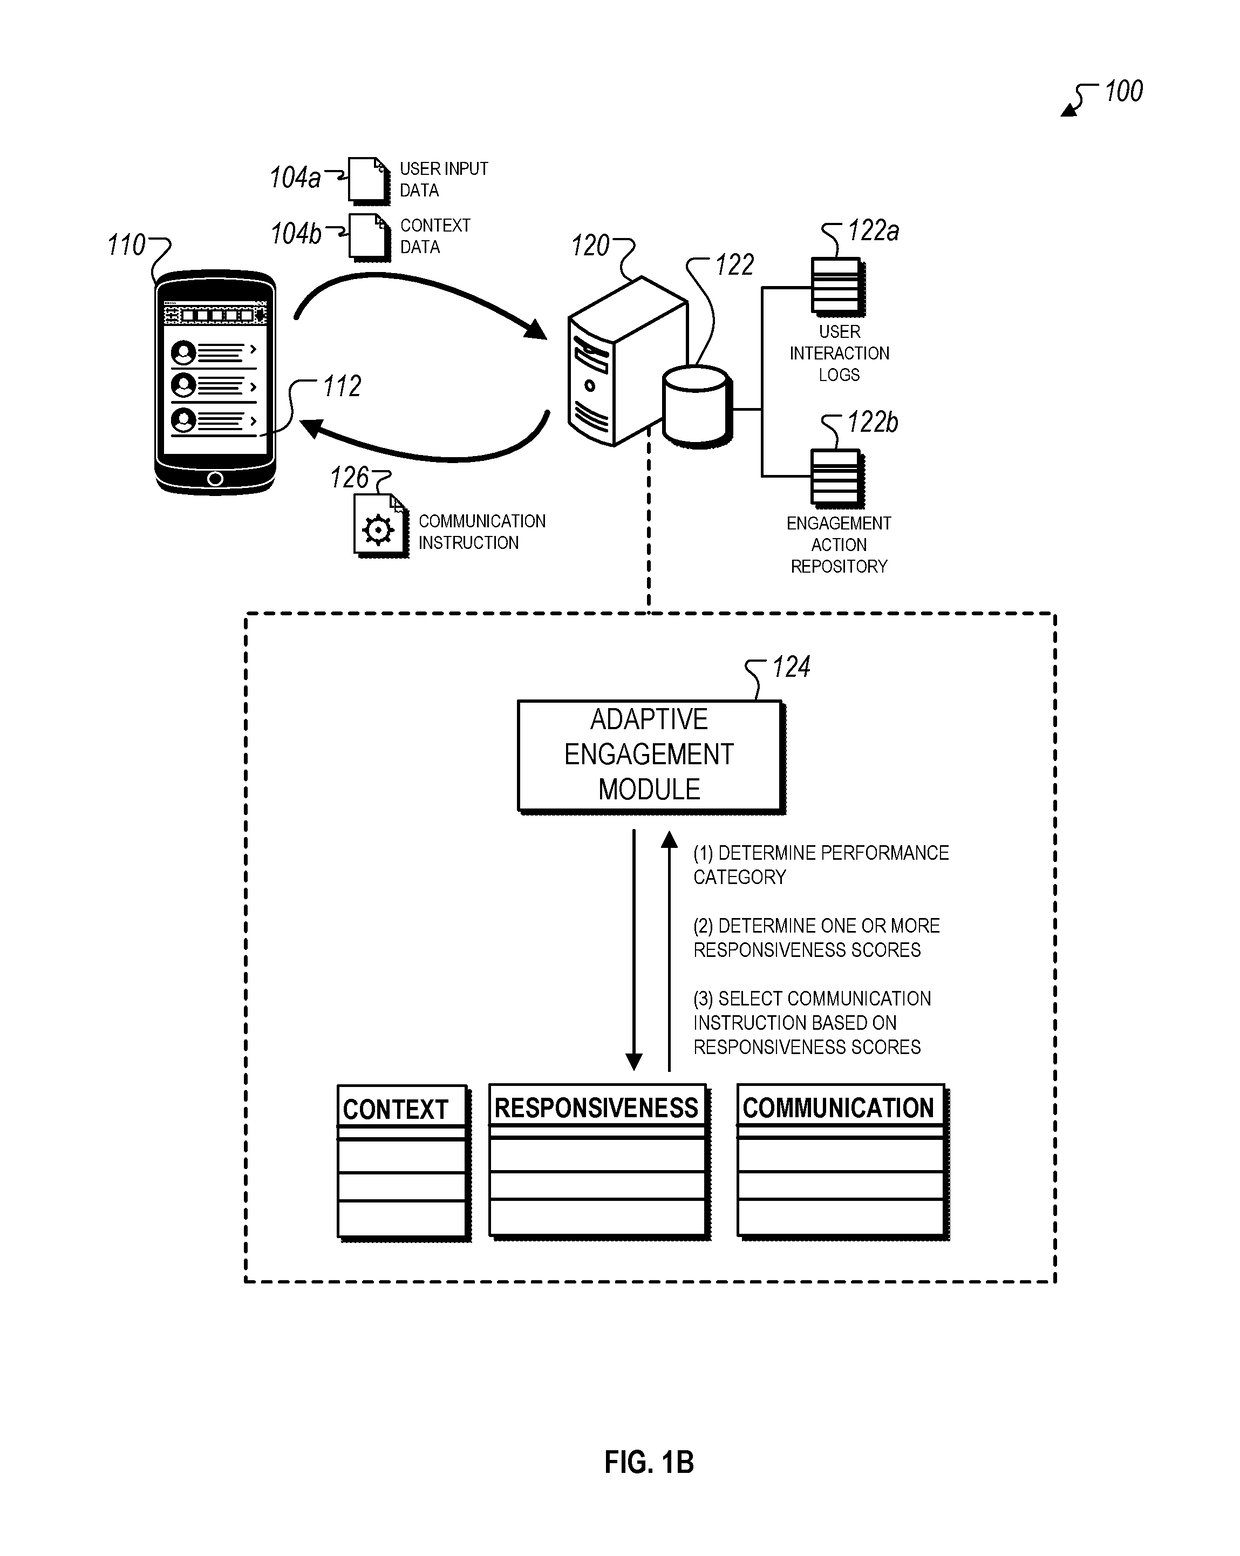 Data-driven adaptation of communications in user-facing applications